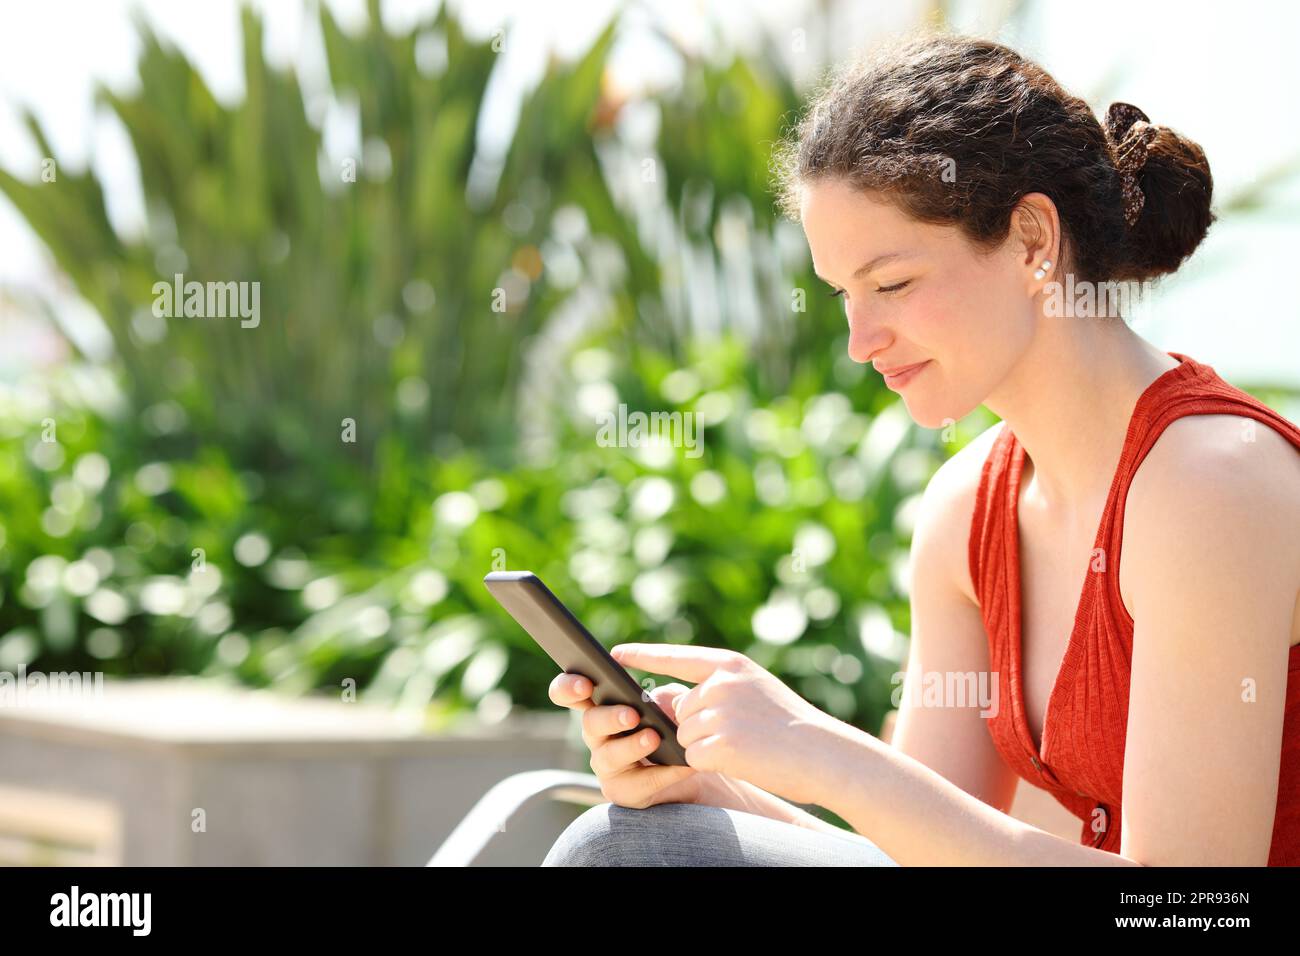 Woman using smart phone sitting on bench in a park Stock Photo